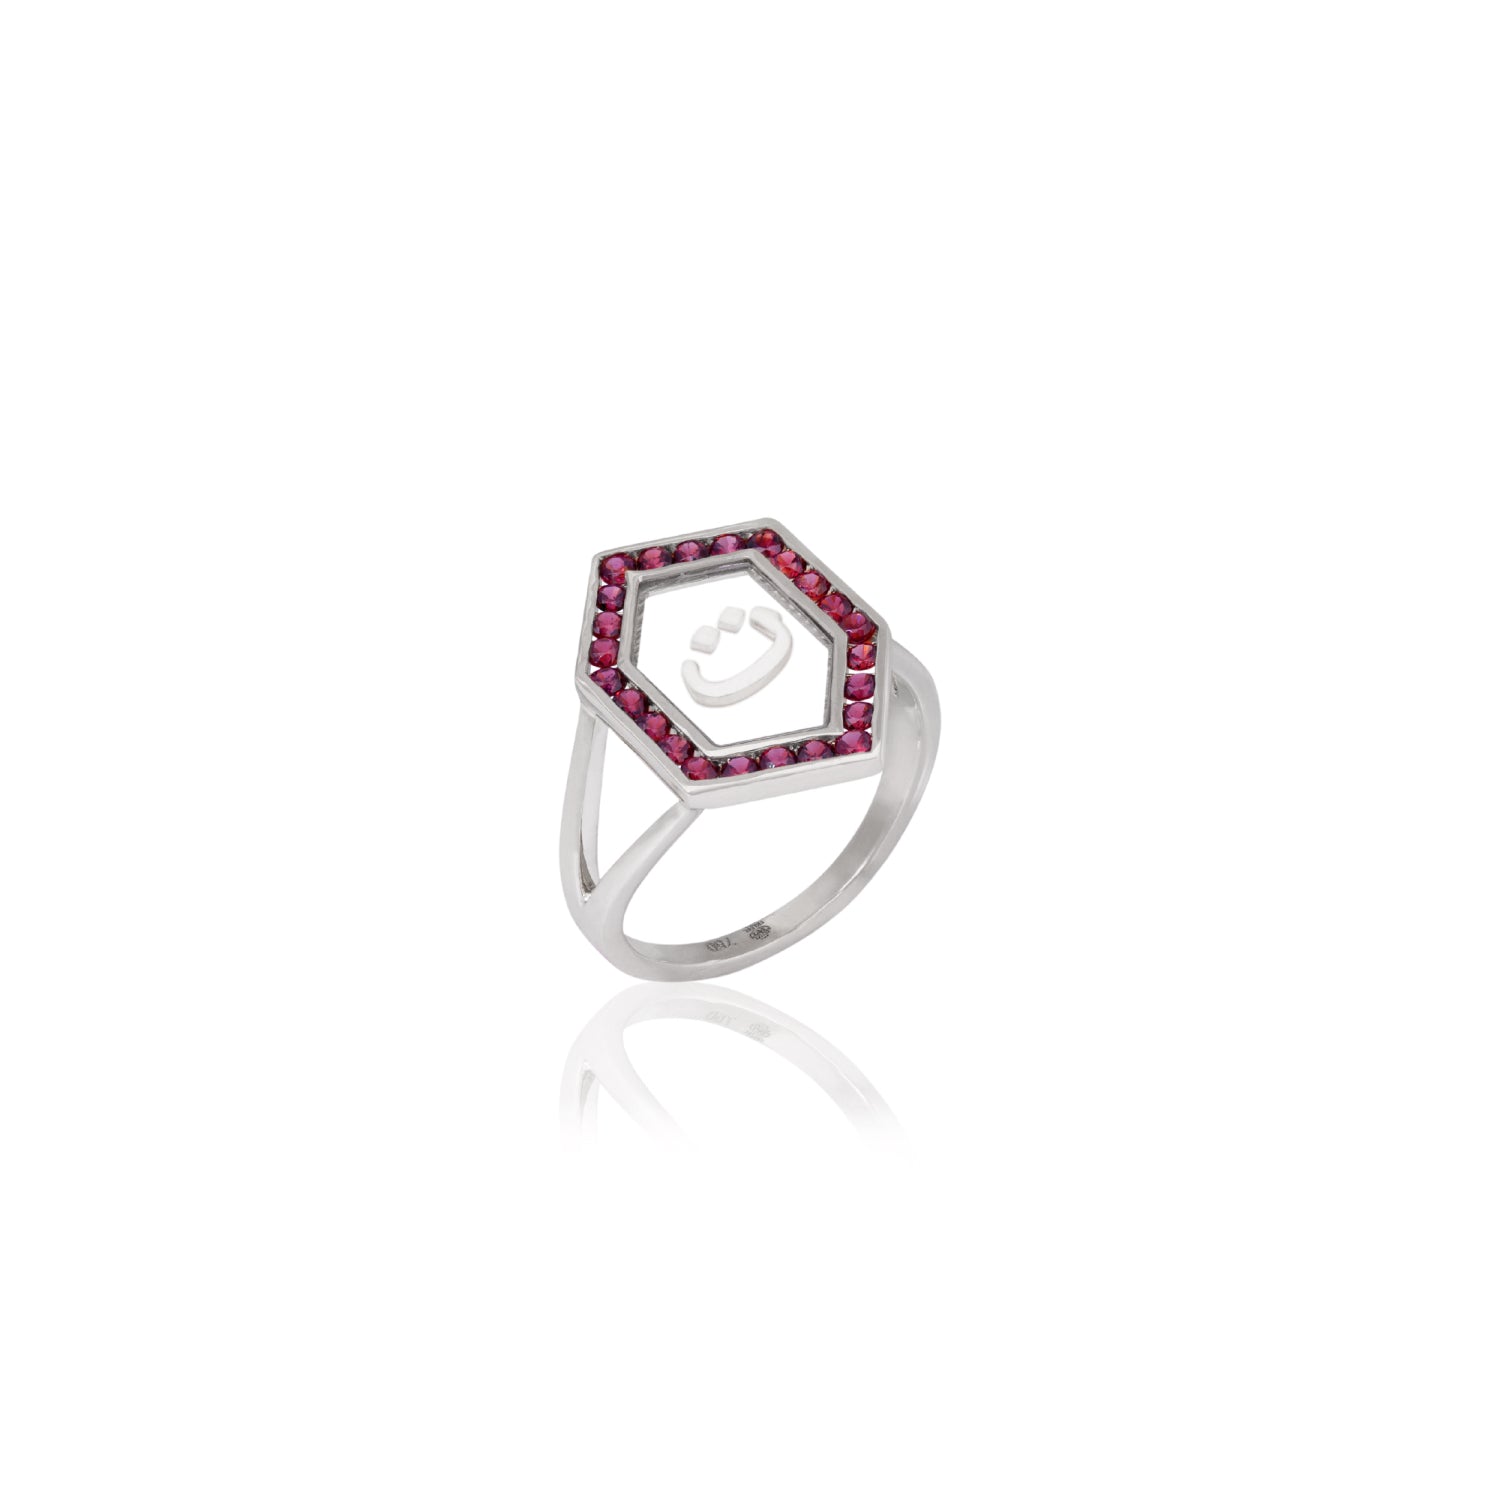 Qamoos 1.0 Letter ت Ruby Ring in White Gold